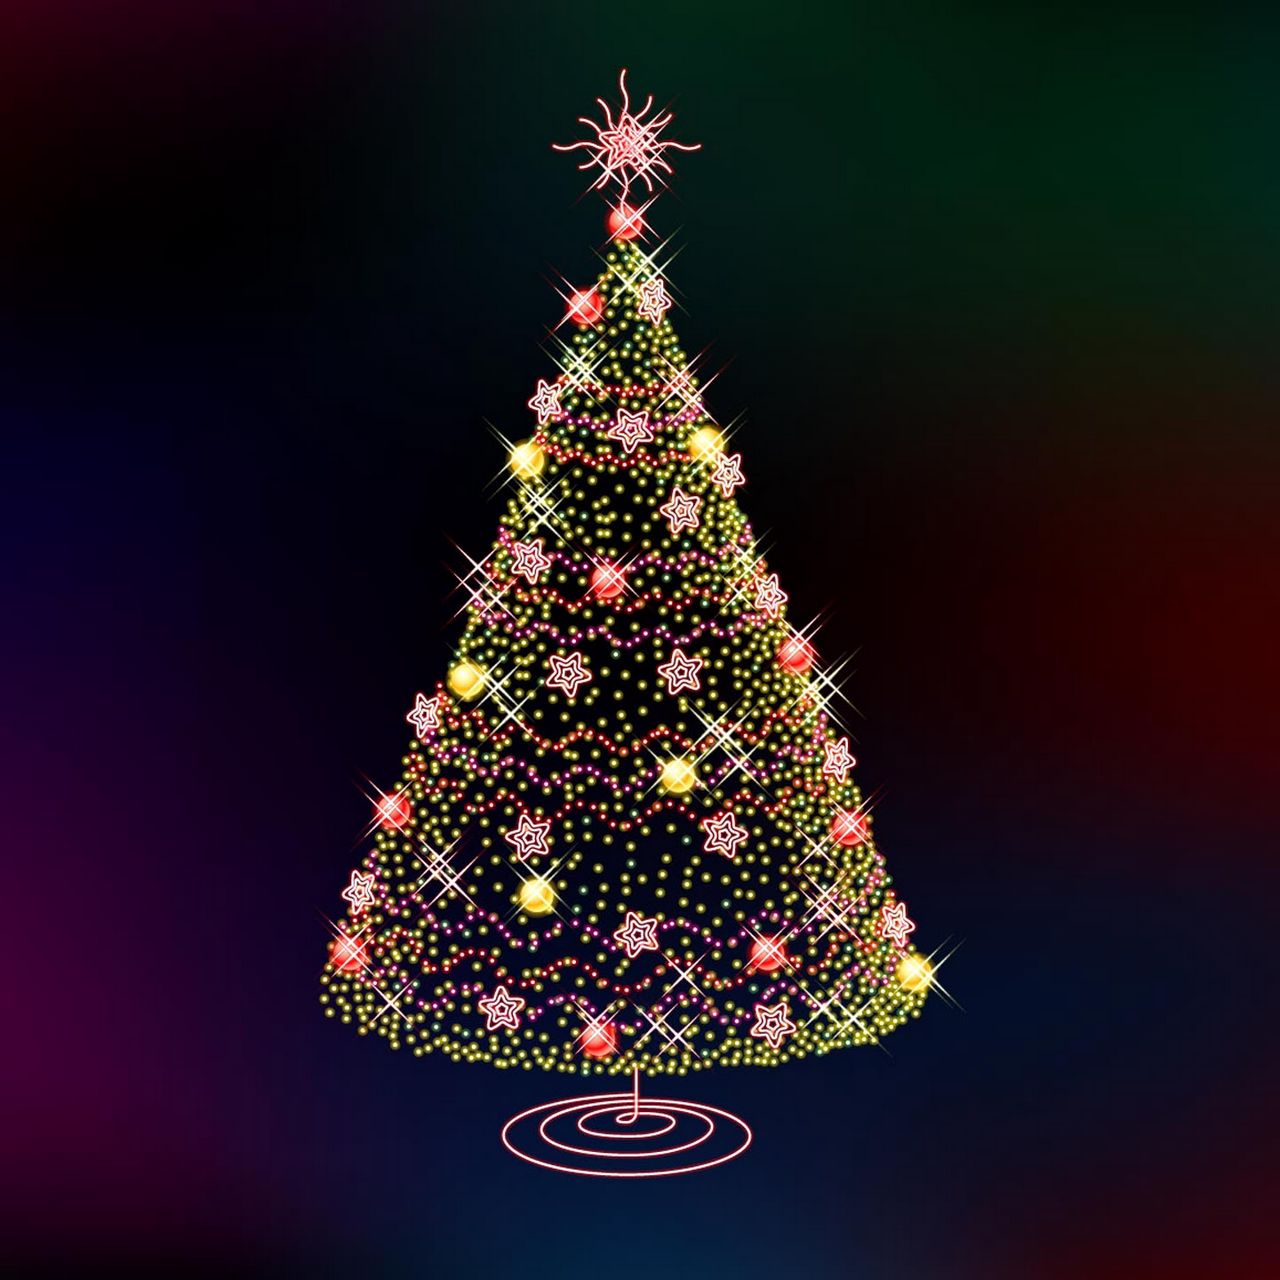 Wallpaper Christmas Tree New Year Colorful